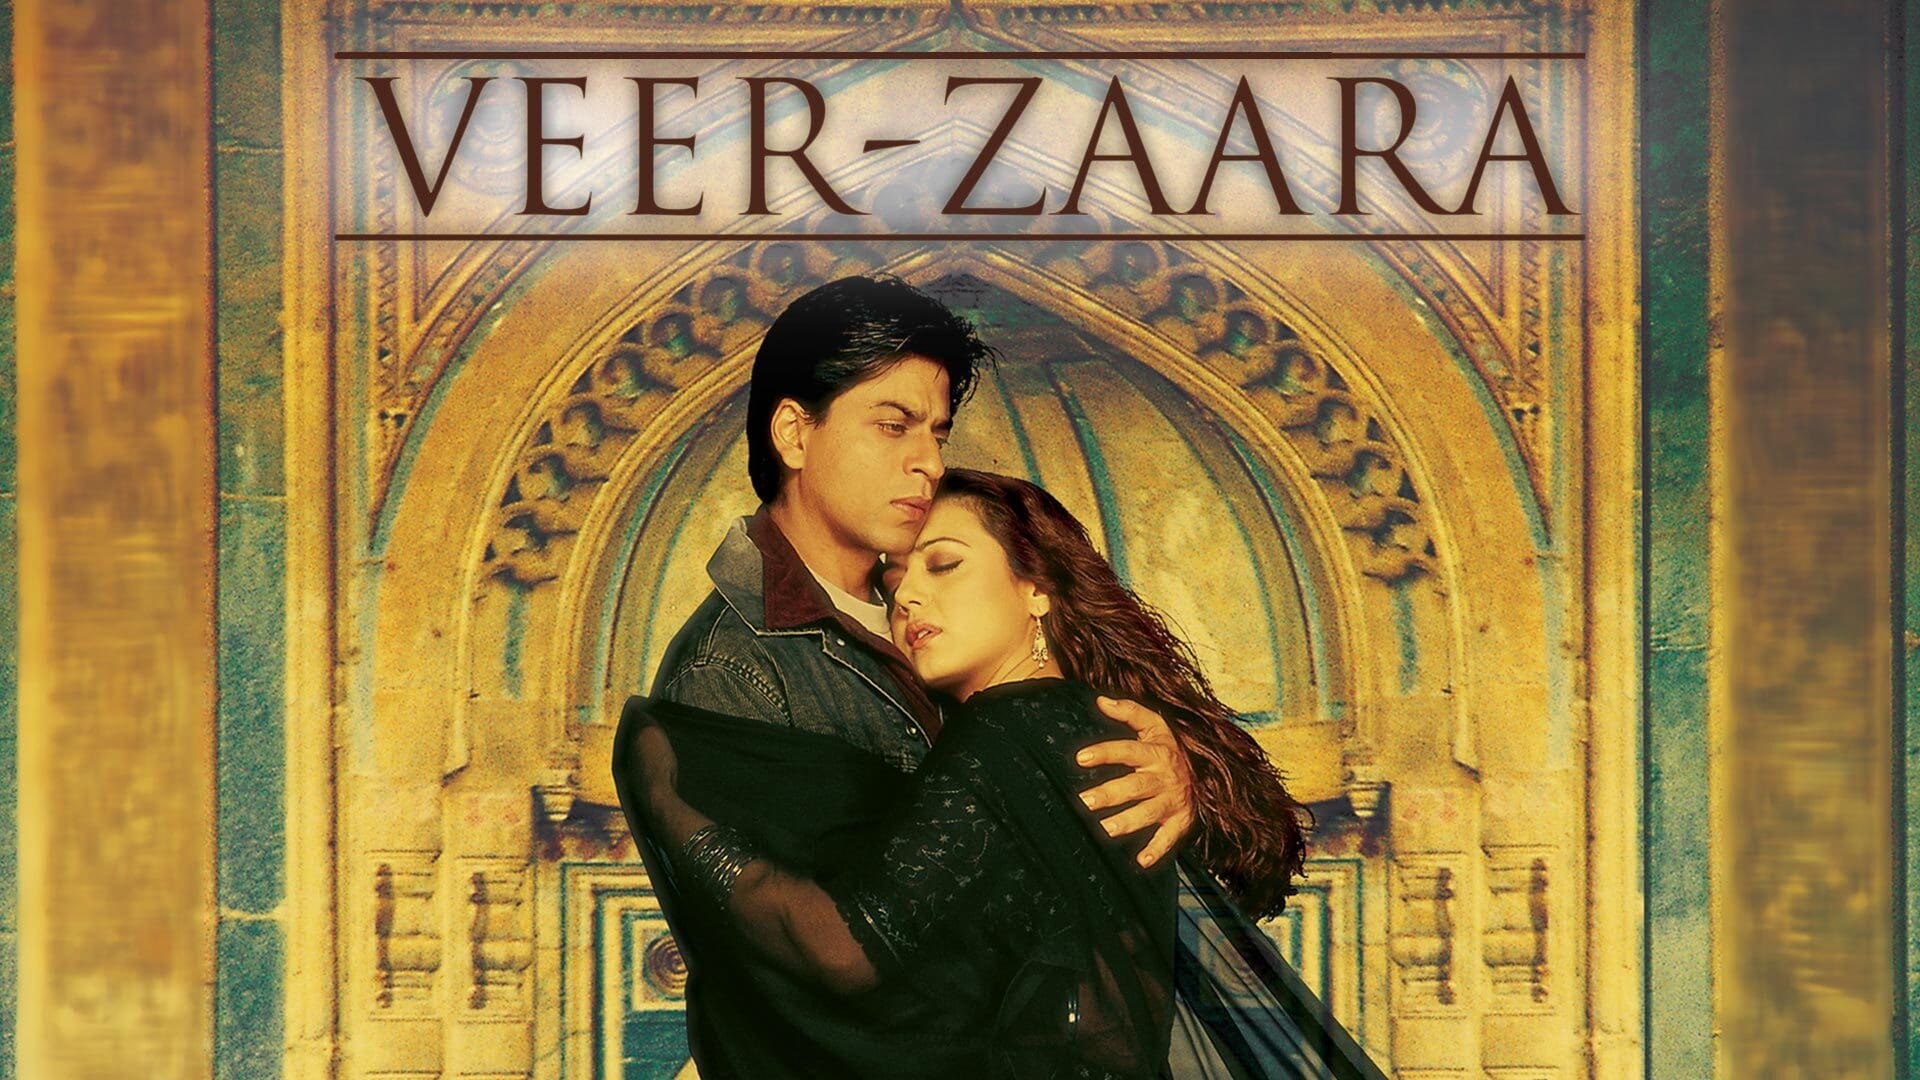 Watch Veer-Zaara (2004) : Full Movie Online In HD Quality Squadron Le...